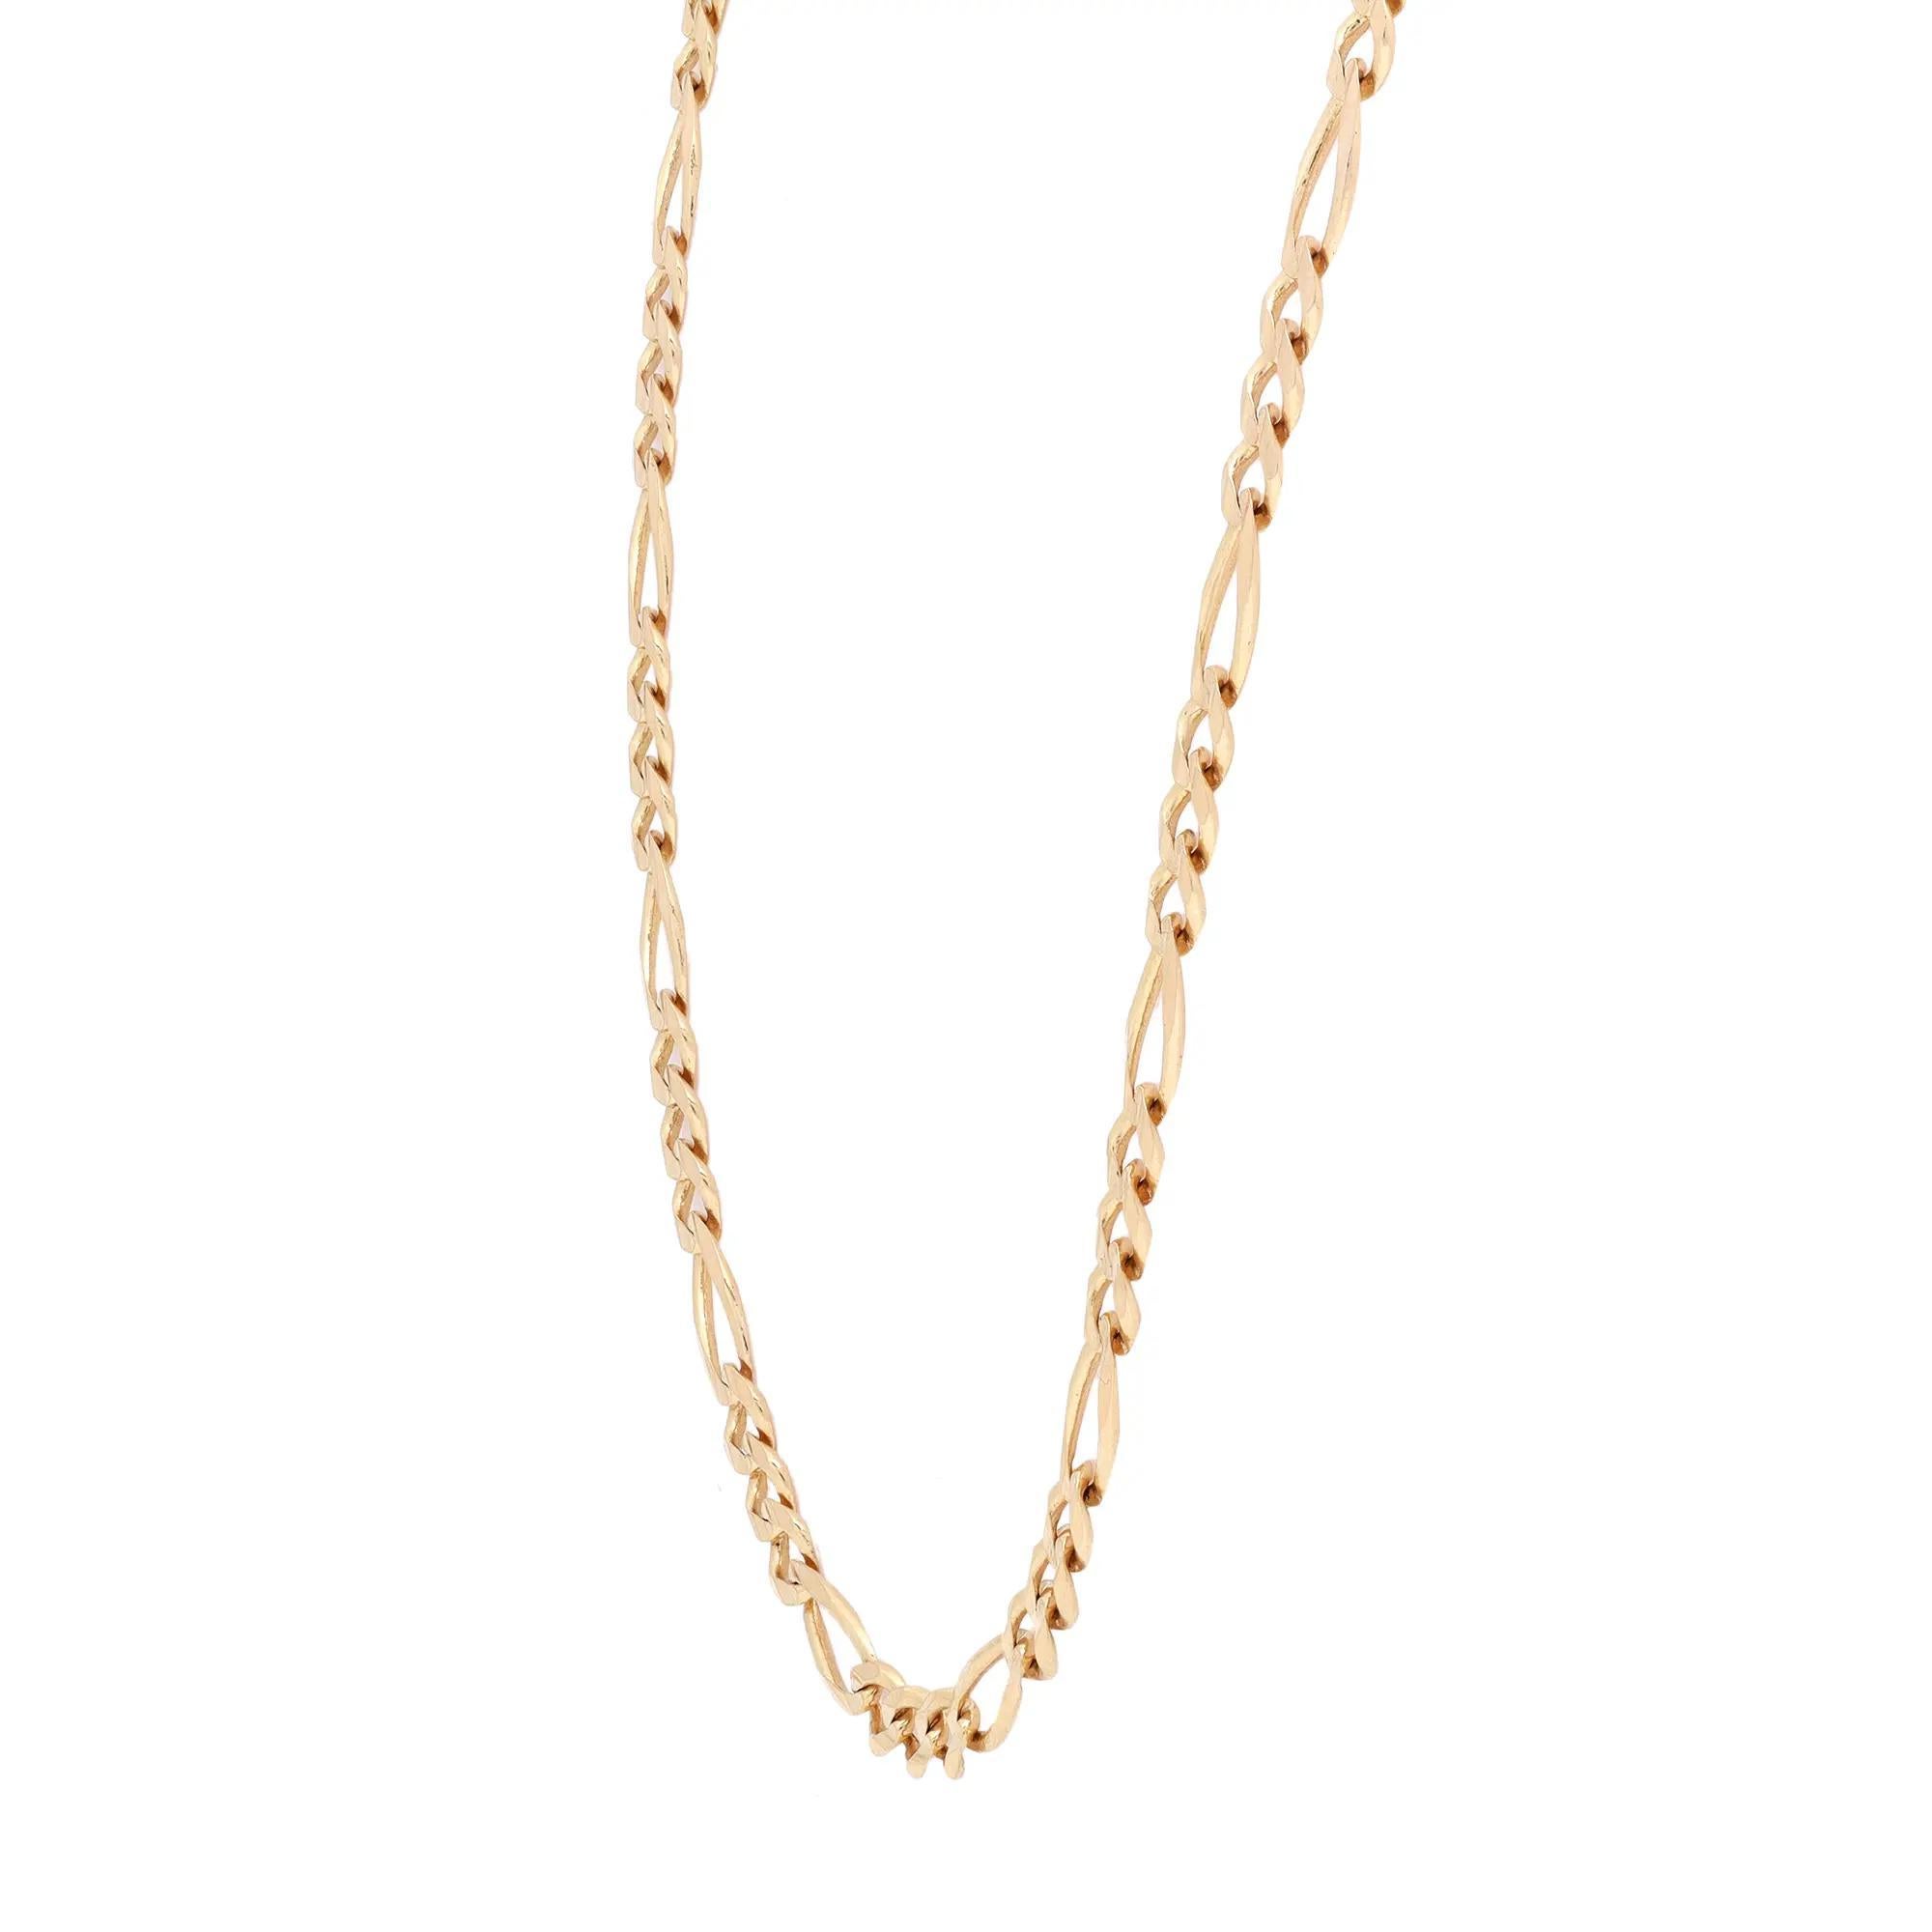 Showcase your classic sense of style with this unisex Figaro solid link chain necklace. Crafted in lustrous 14K yellow gold. Length: 20 inches. Width: 4.05mm Weight: 11.32 grams. Closure: Lobster lock. Whether you layer up or wear it solo, you are